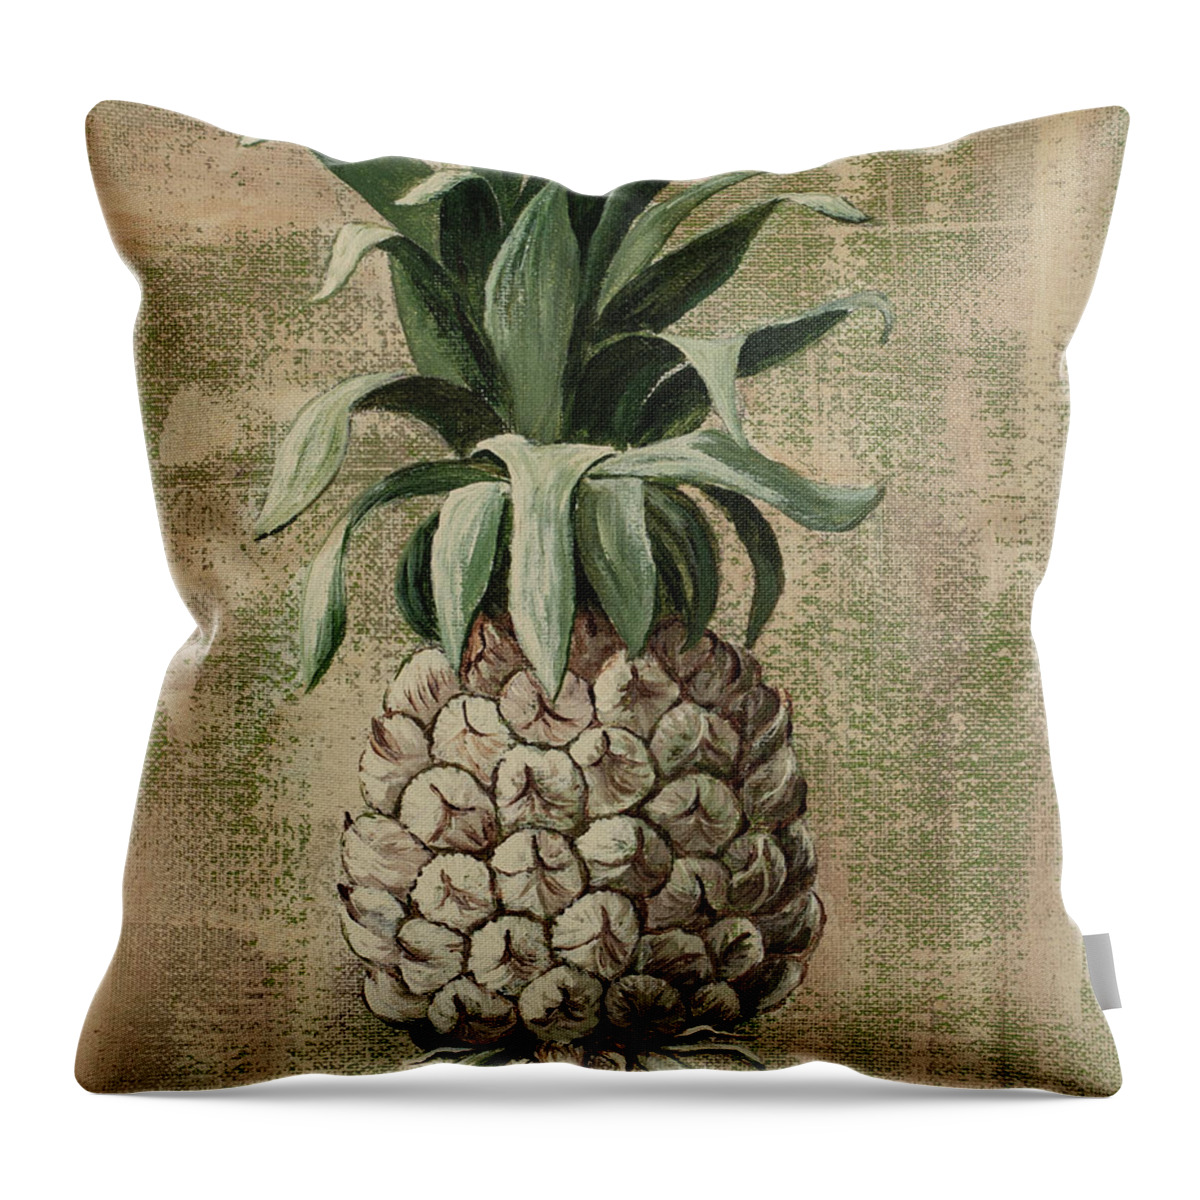 Pineapple Throw Pillow featuring the painting Old Fasion Pineapple 2 by Darice Machel McGuire